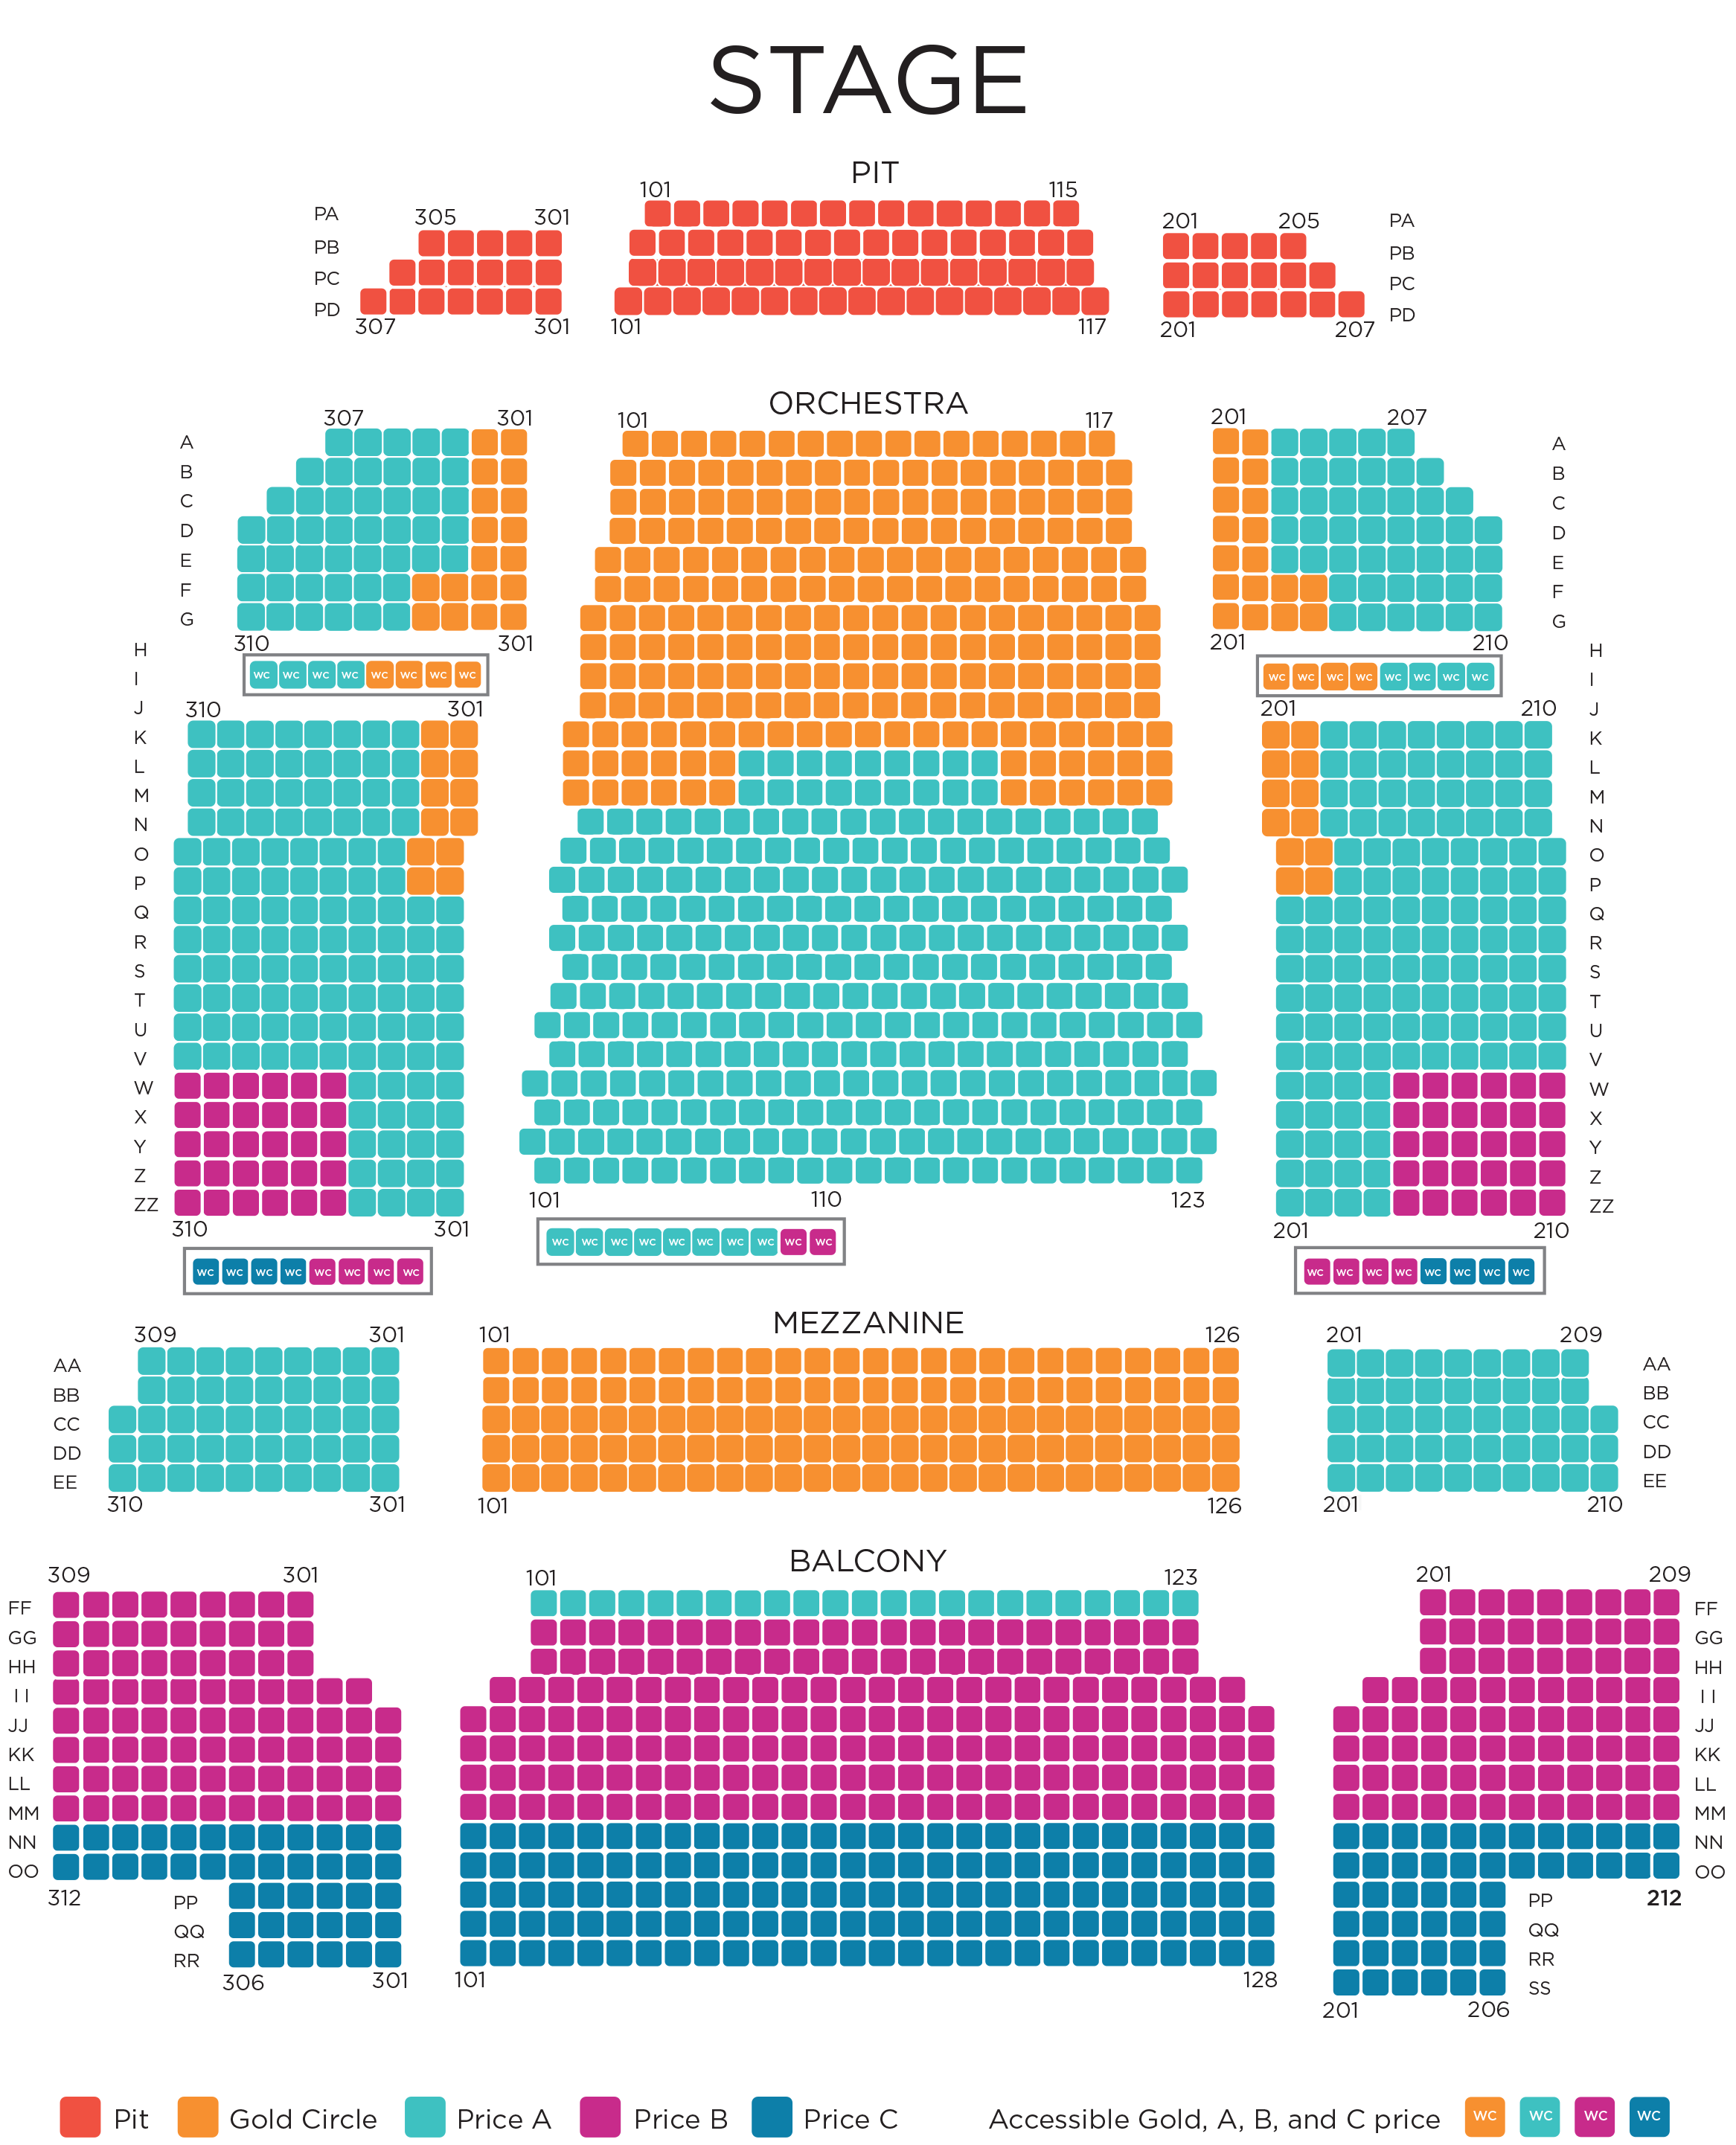 Seating Chart with Price Levels